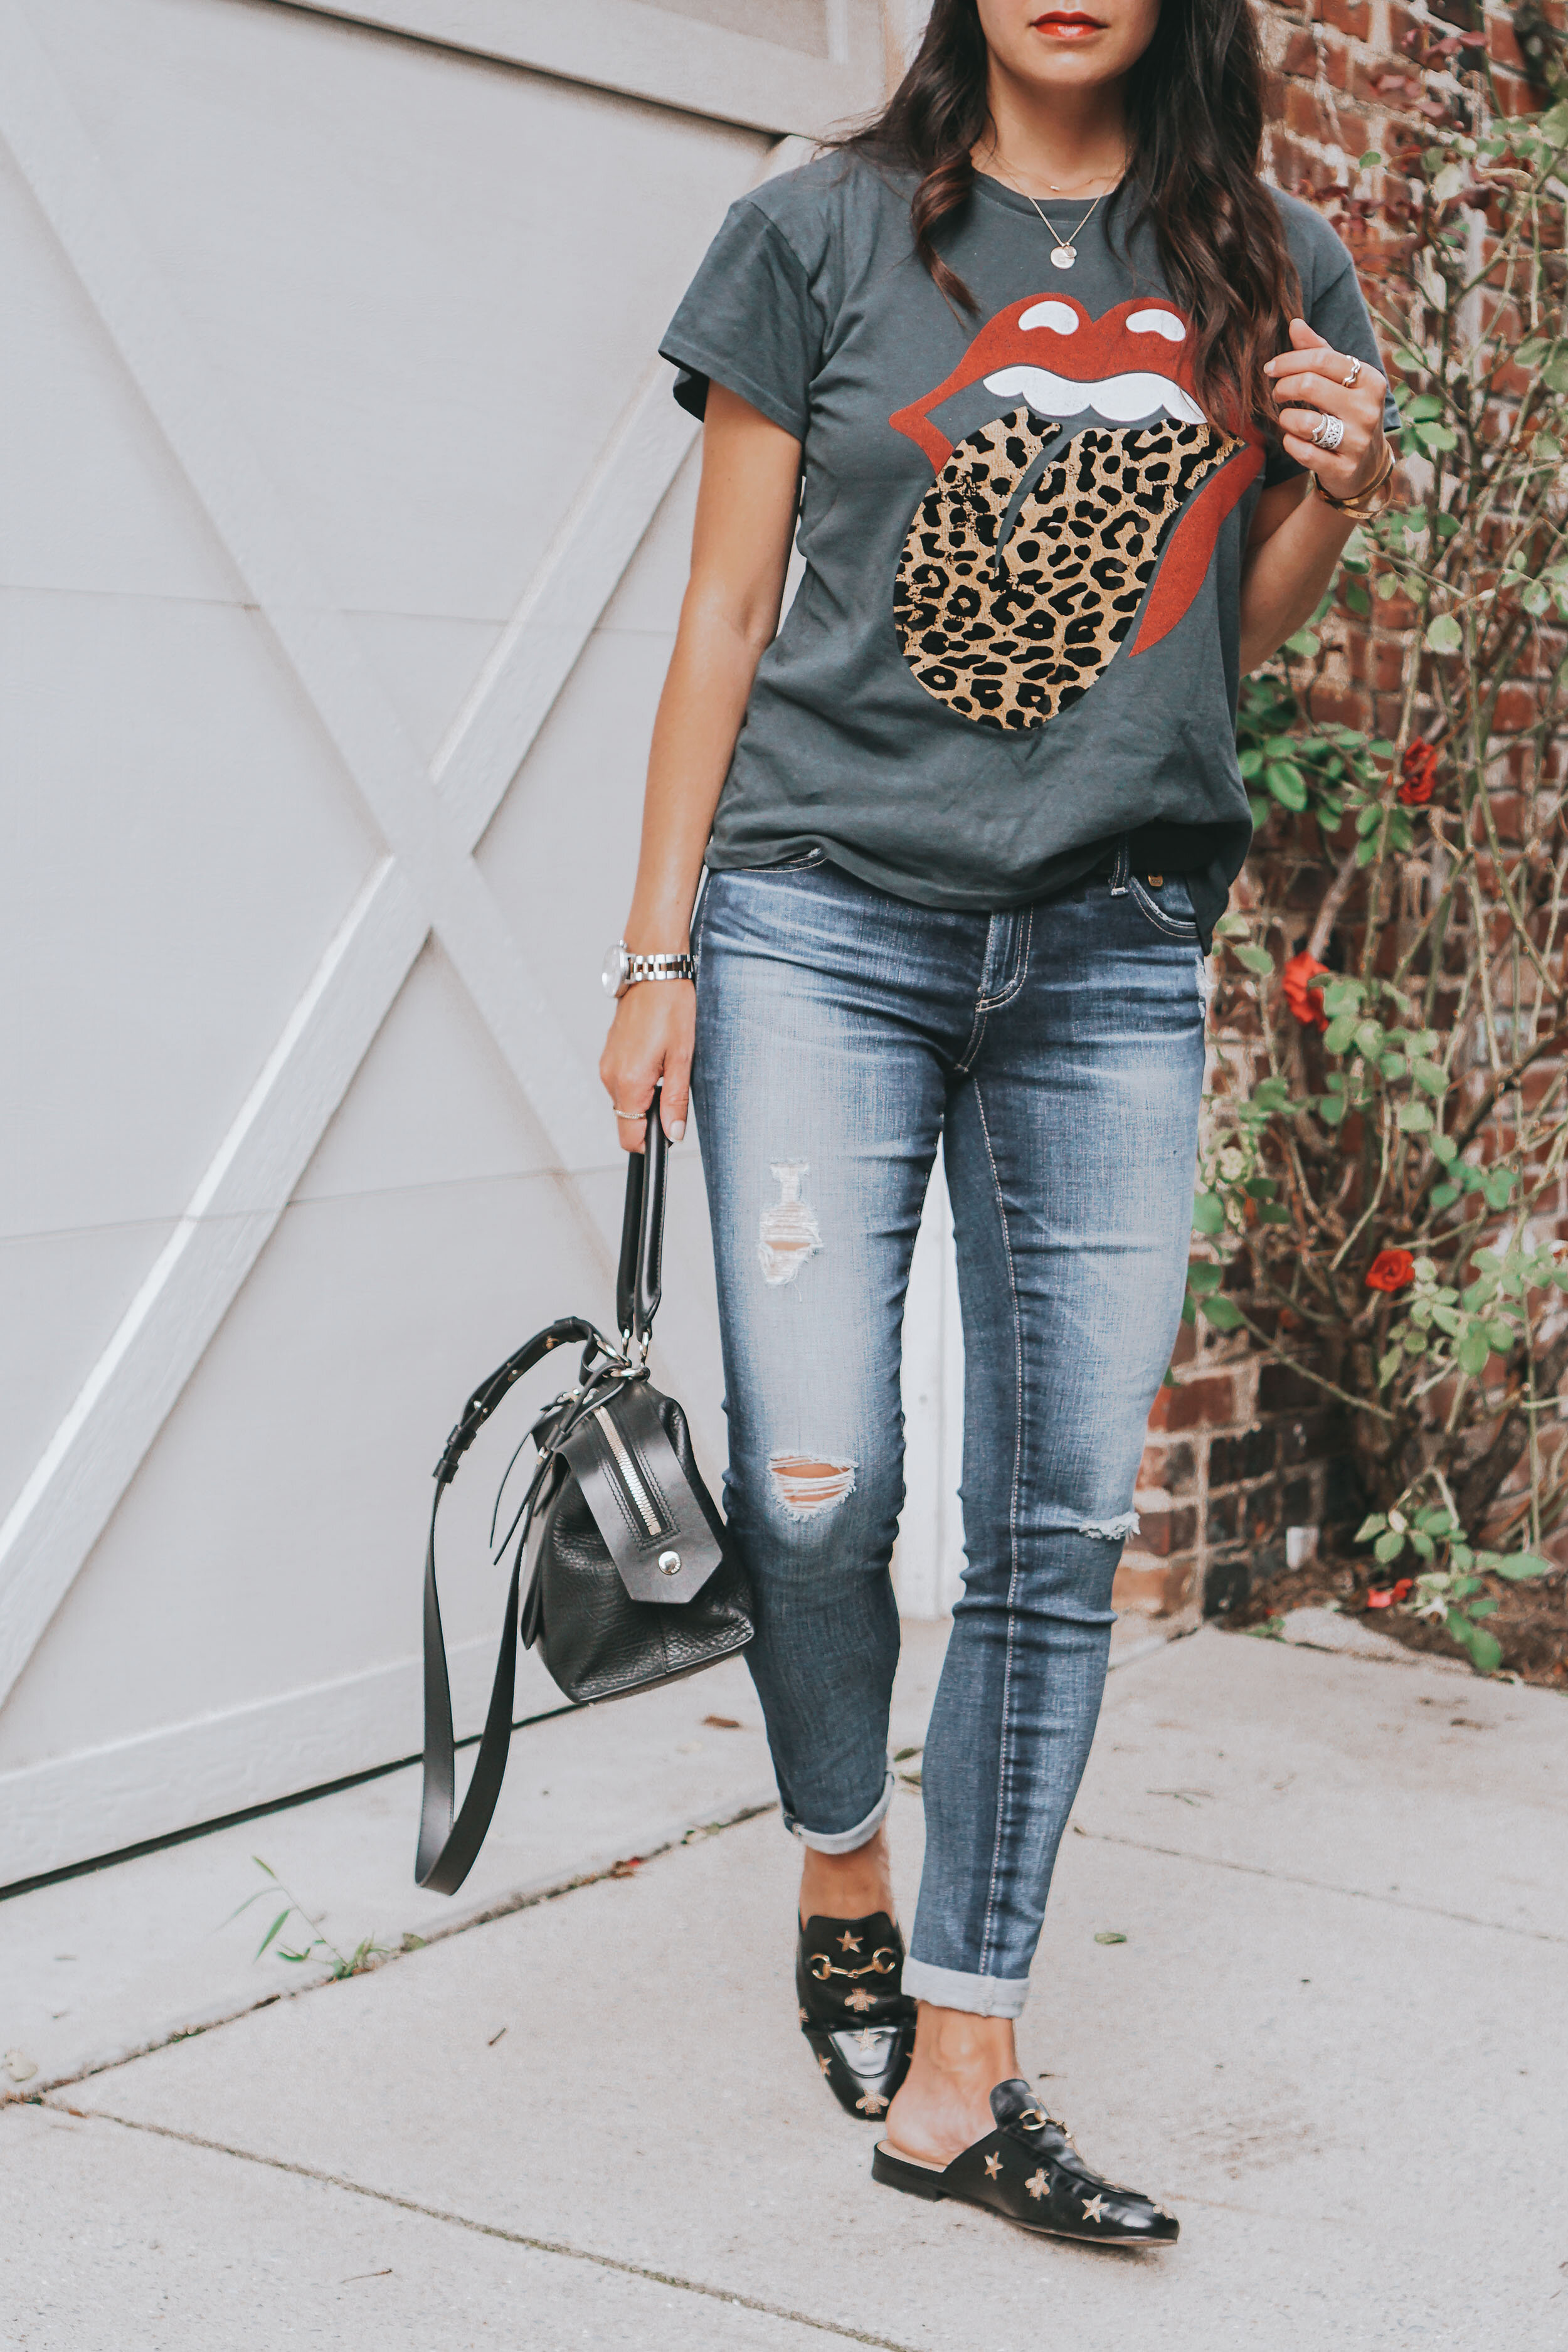 Cute Band Tee Outfit, How to Style Gucci Slides Mules